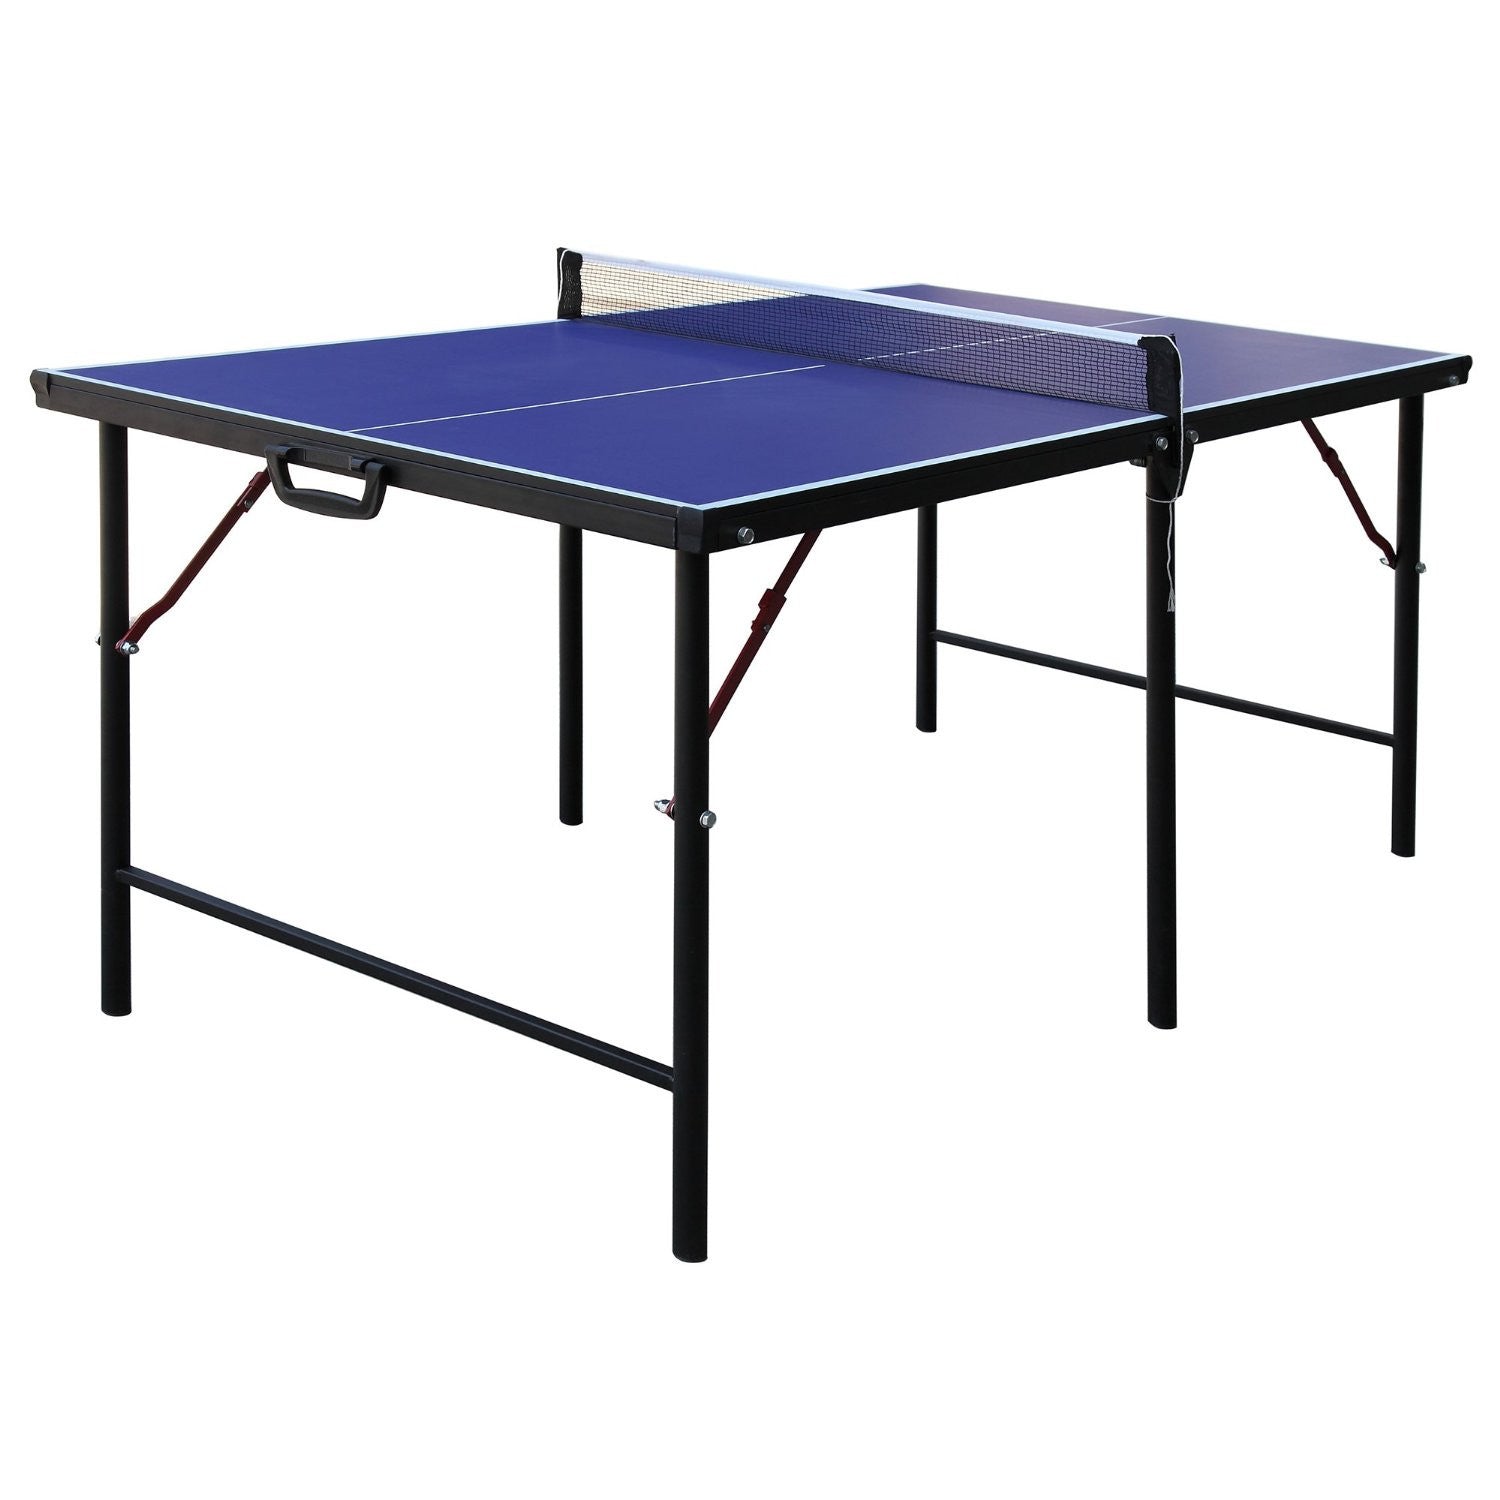 Pong on The Go Portable Table Tennis Playset - Comes with Net, 2  Black/Green Paddles, 3 Balls, and Carry Bag - Indoor/Outdoor Tabletop  Travel Game